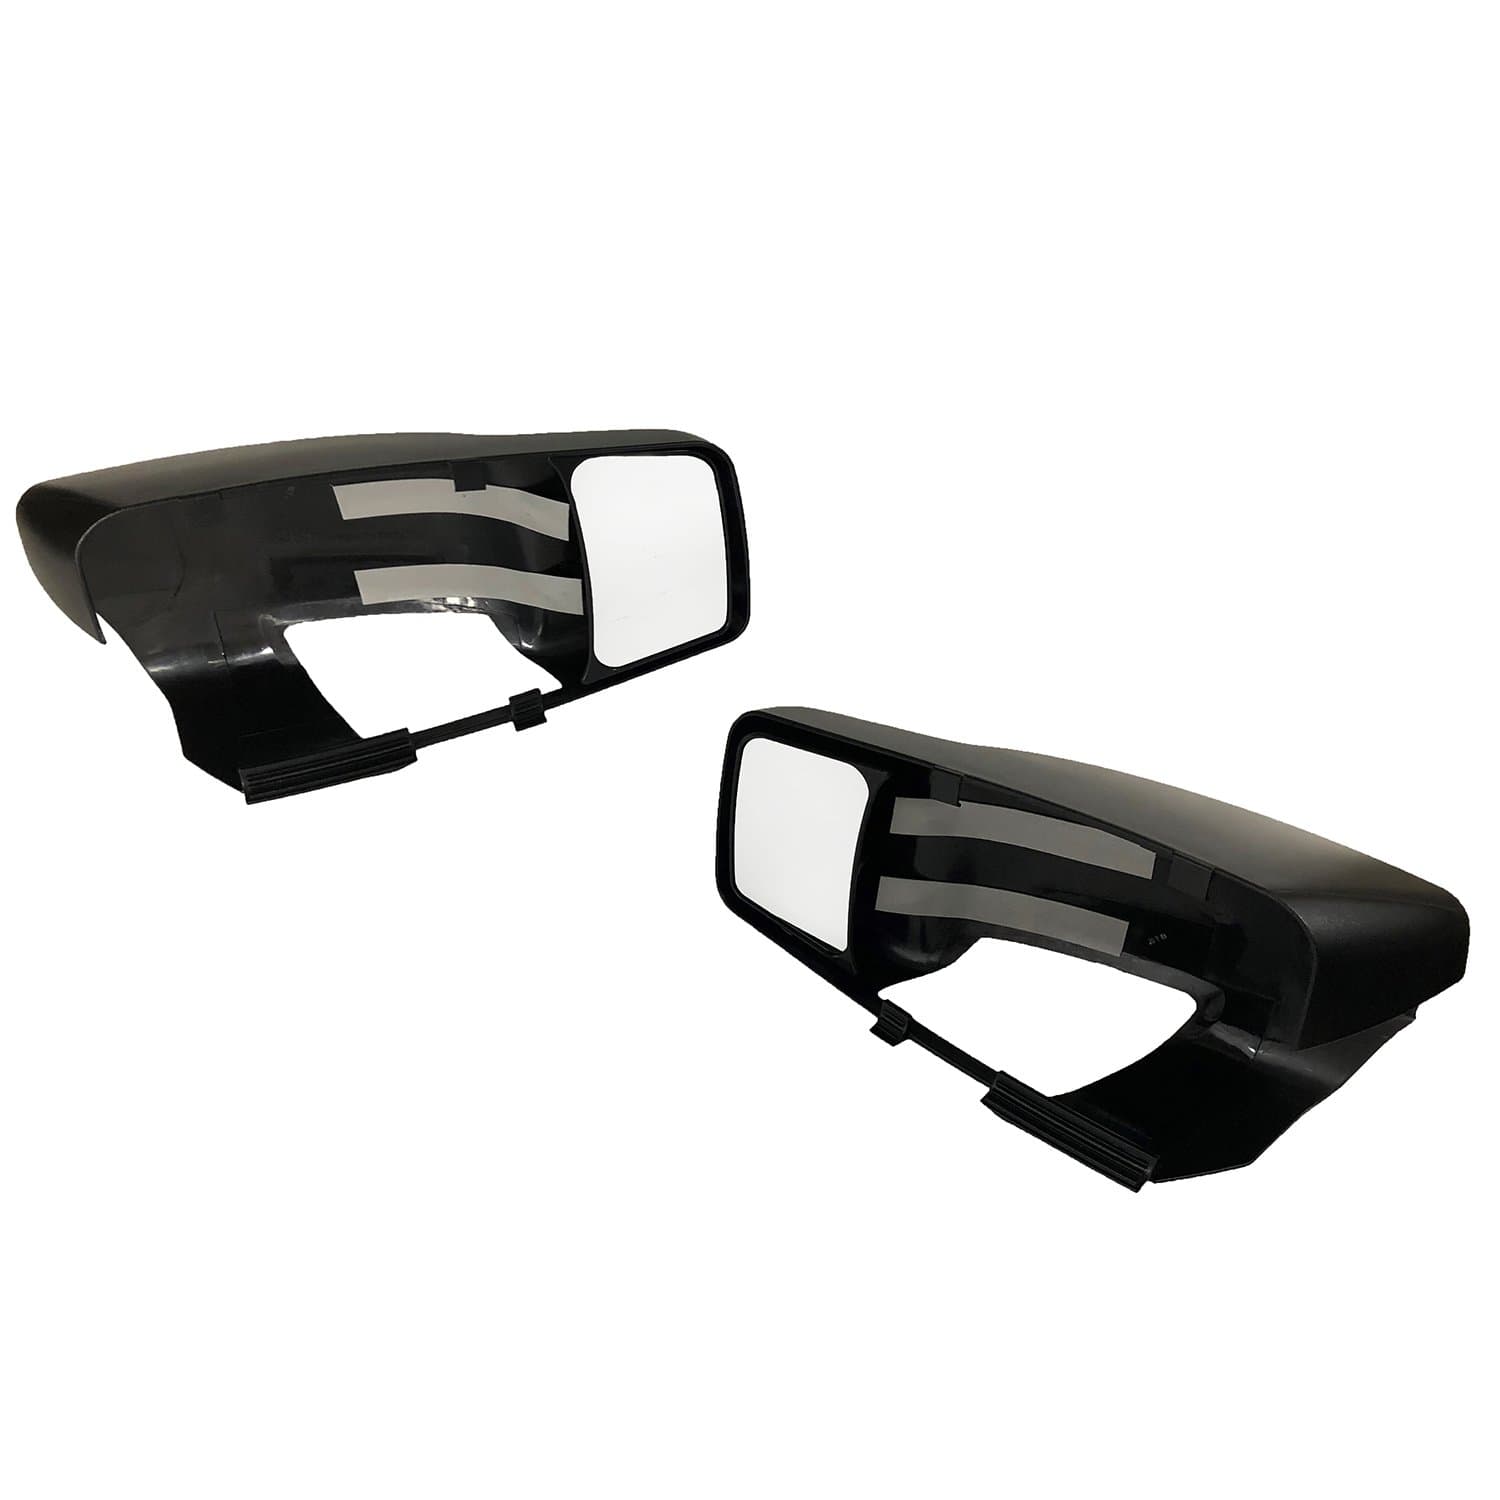 K-Source Fit System 80710 Snap-on Black Towing Mirror for Dodge RAM 1500/2500/3500